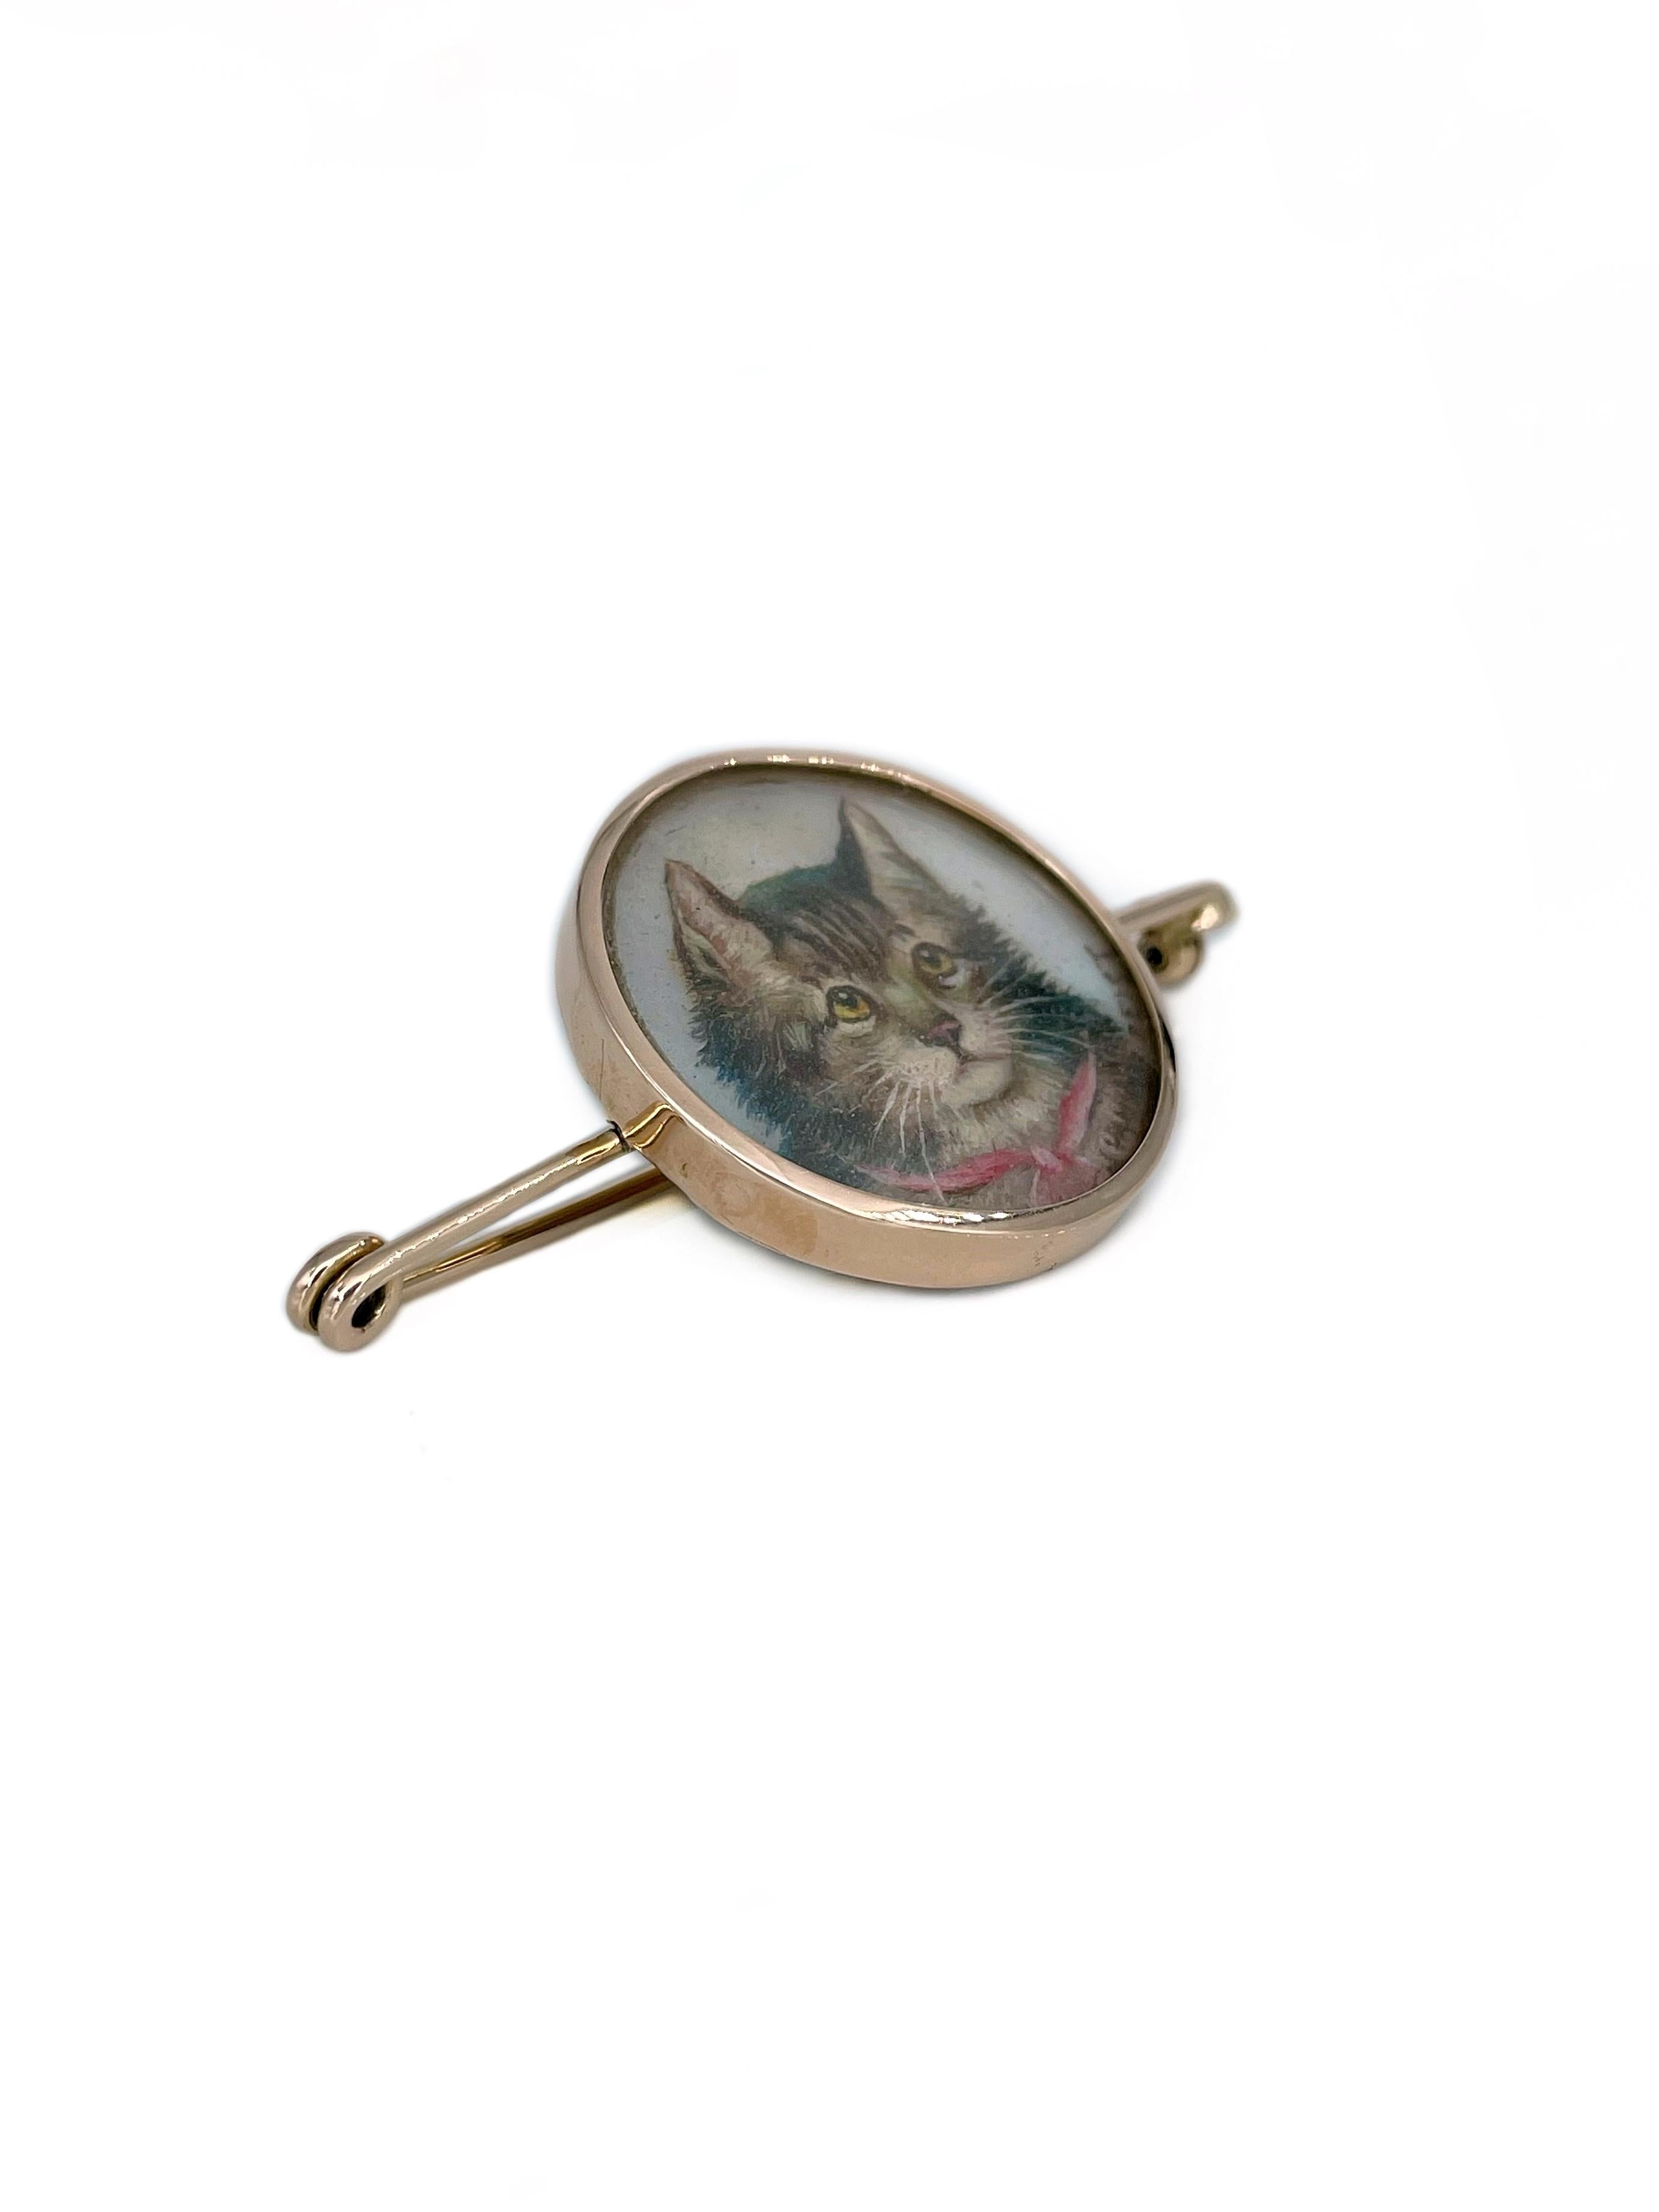 This is a Victorian pin brooch crafted in 18K gold. Circa 1900. 

The piece features a detailed miniature portrait of a cat. It is hand painted. There is a signature of an author. 

Weight: 9.03g
Length: 5.5cm
Diameter: 2.7cm
———

If you have any